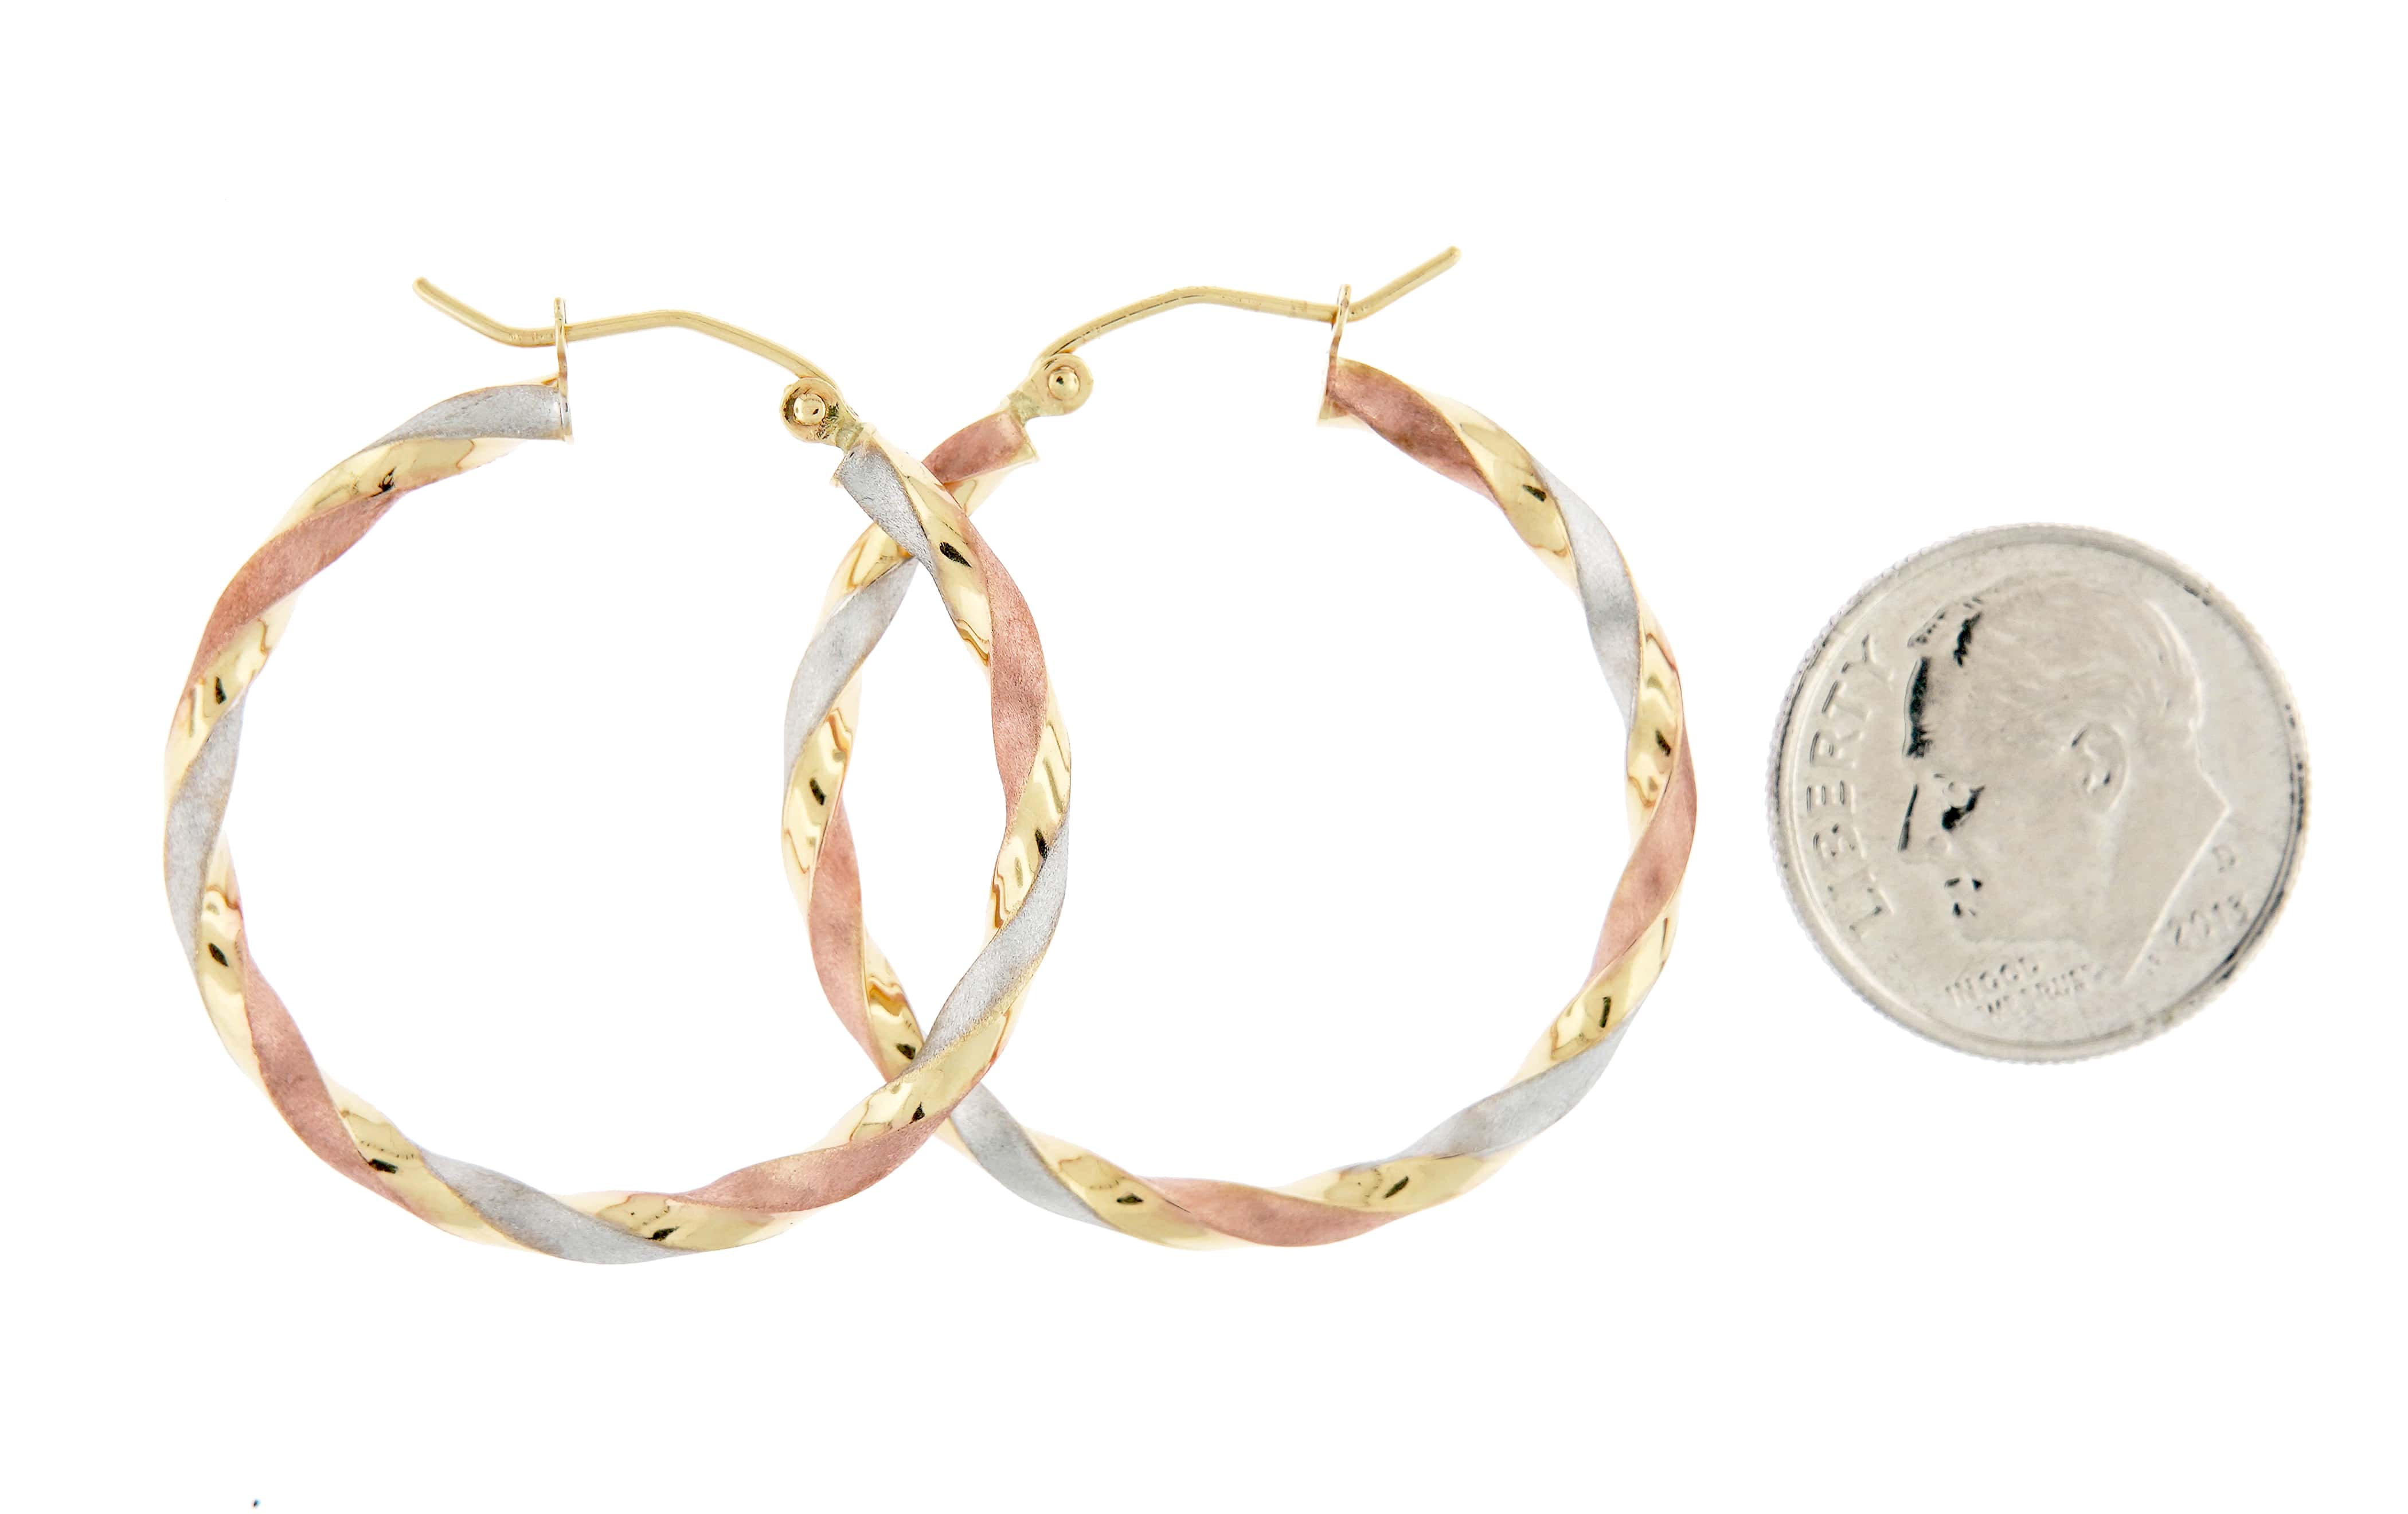 14k Gold Tri Color Twisted Round Hoop Earrings